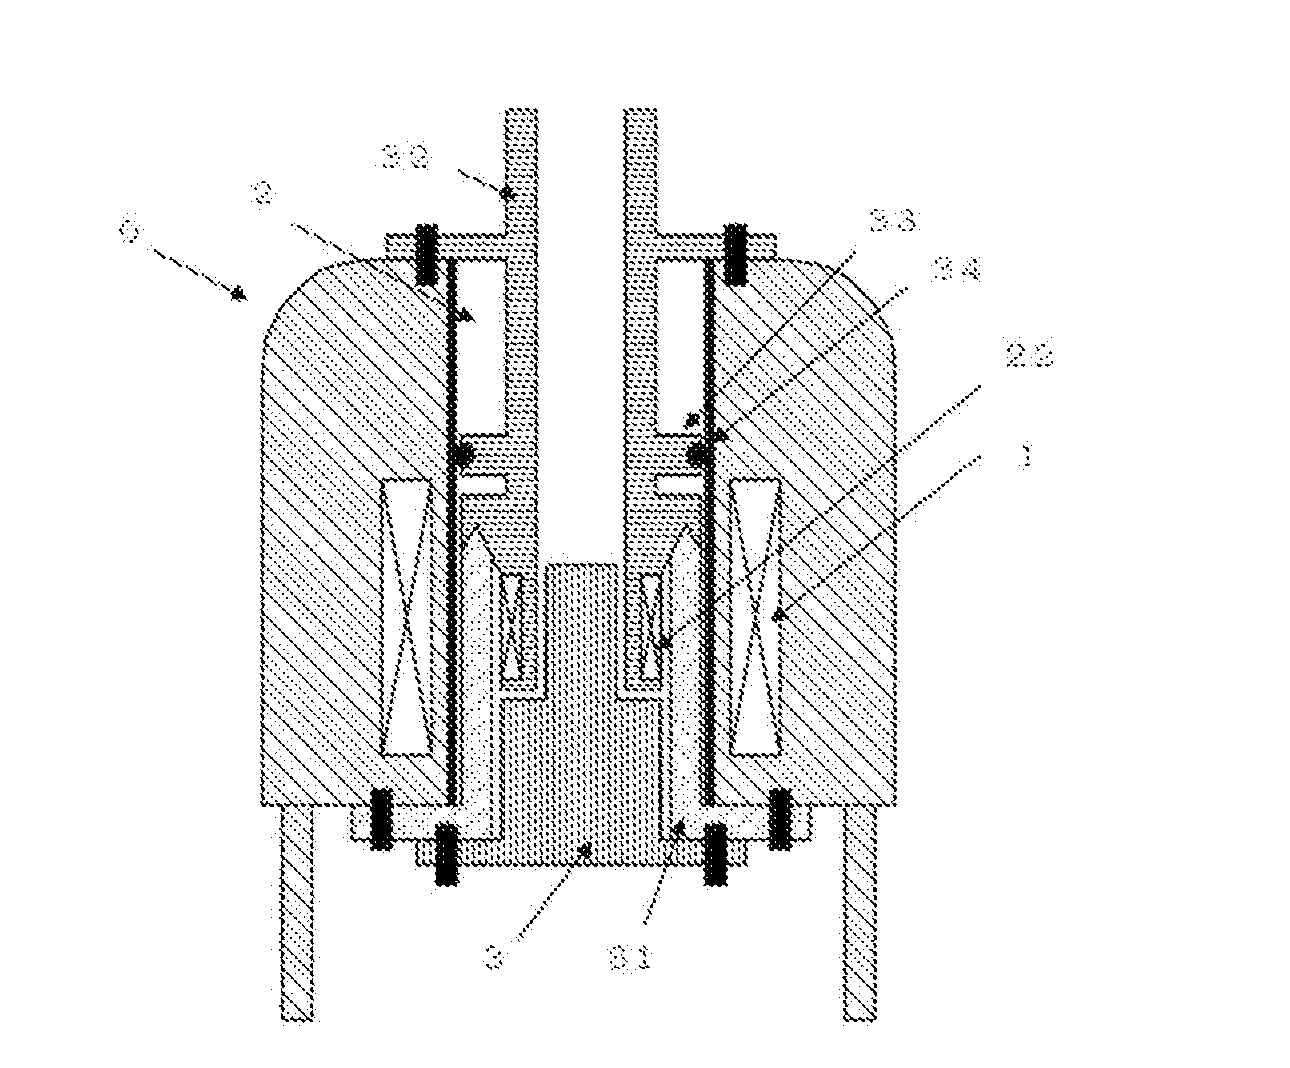 Coil Assembly for Accurate Adjustment of Magic Angle in Solid-State NMR Apparatus and Method of Adjusting Magic Angle Using Such Coil Assembly